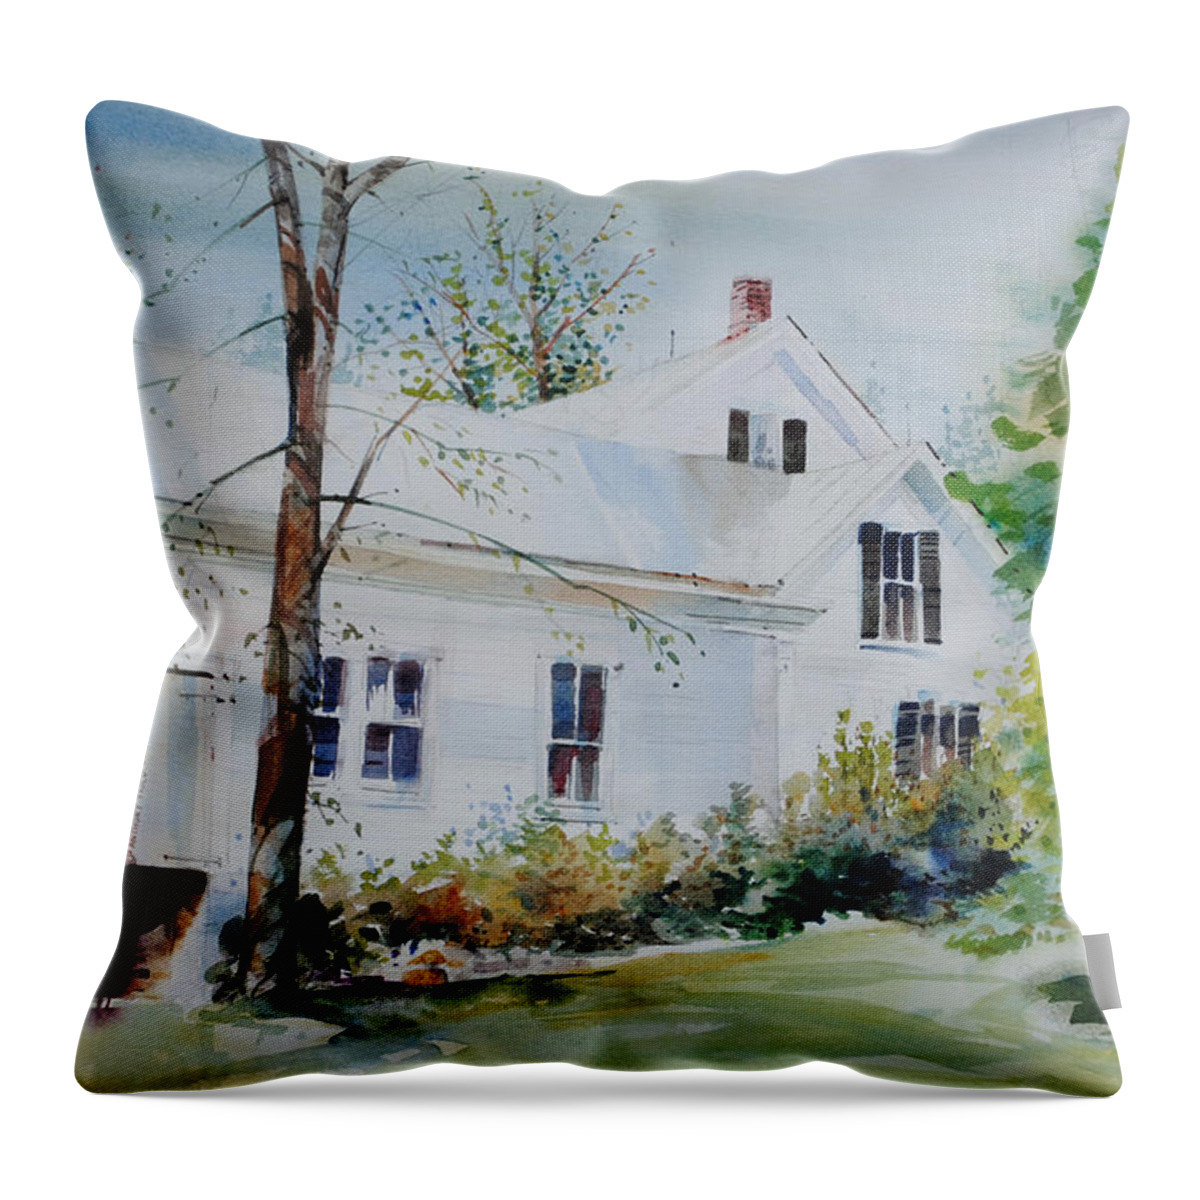 Countryside Homes Throw Pillow featuring the painting Backside Inn by P Anthony Visco